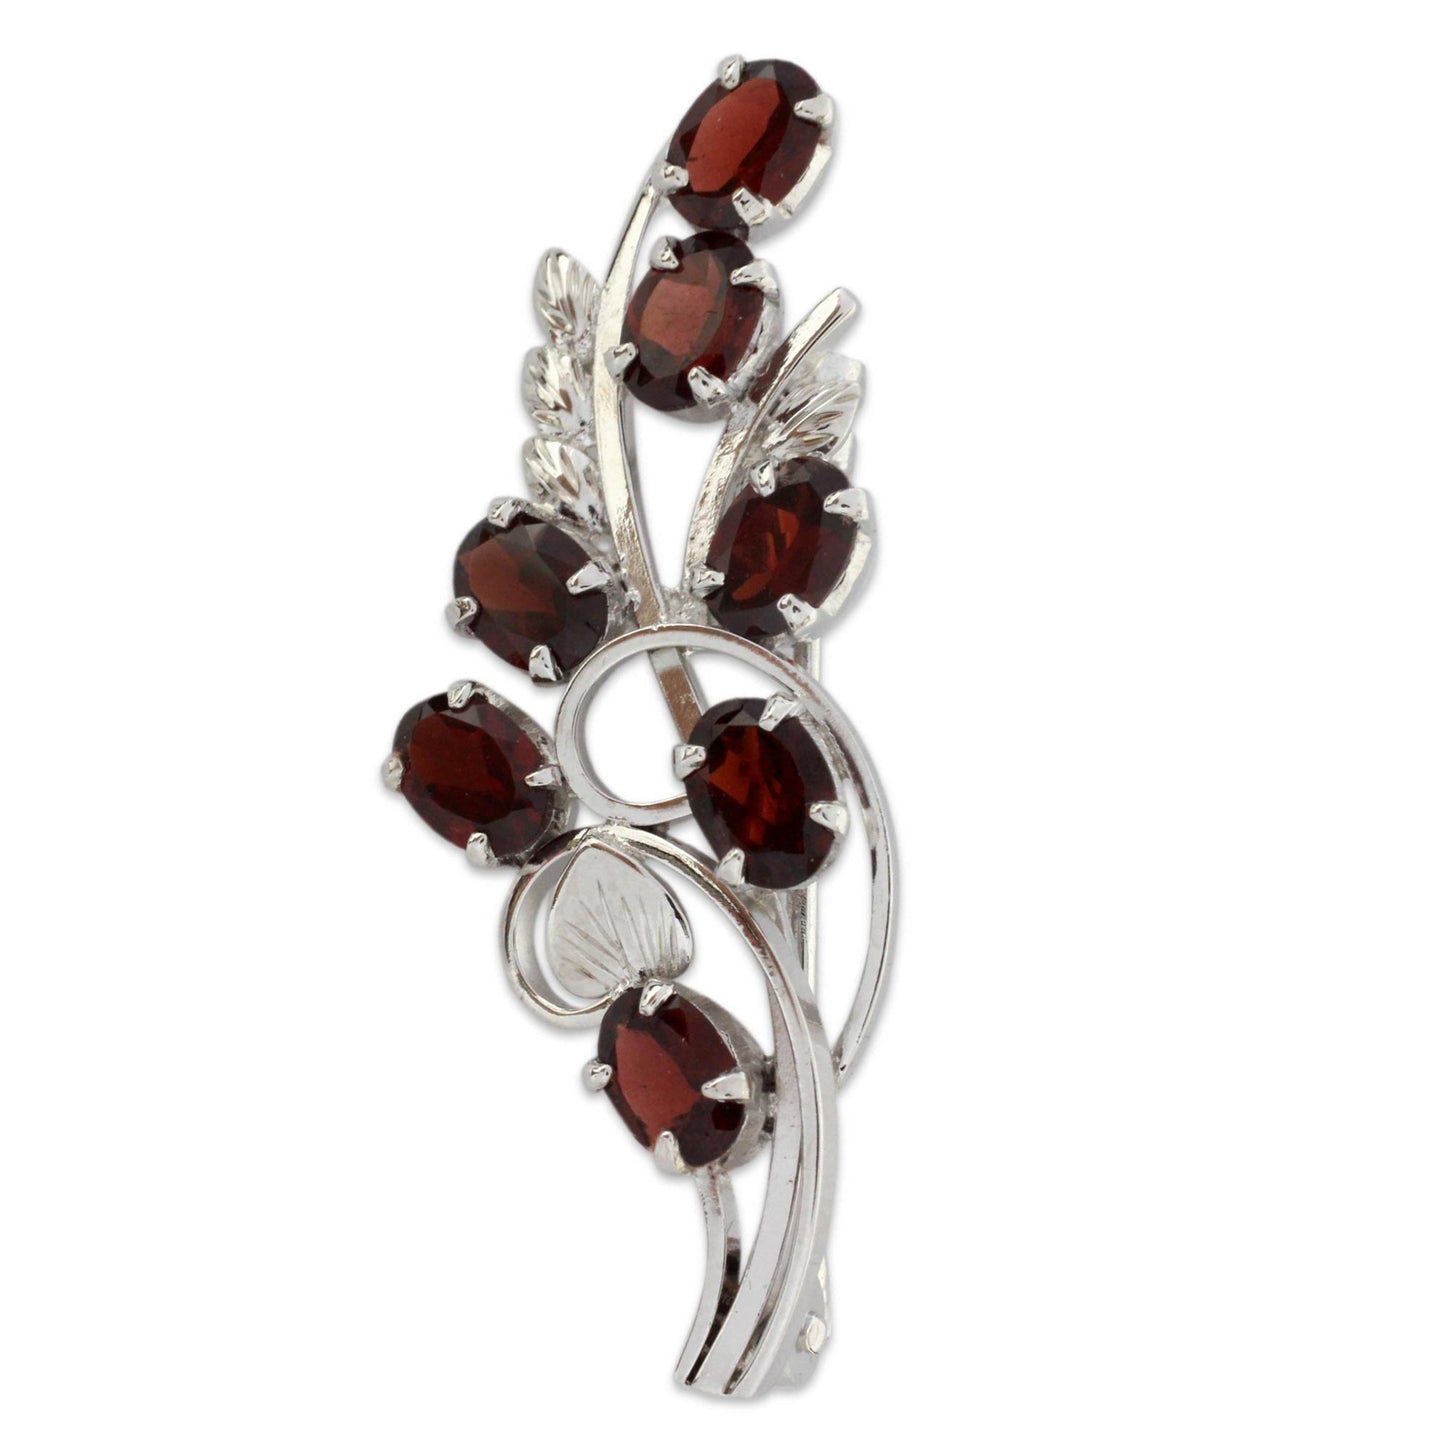 Floral Passion Garnet and Sterling Silver Floral Brooch Pin from India